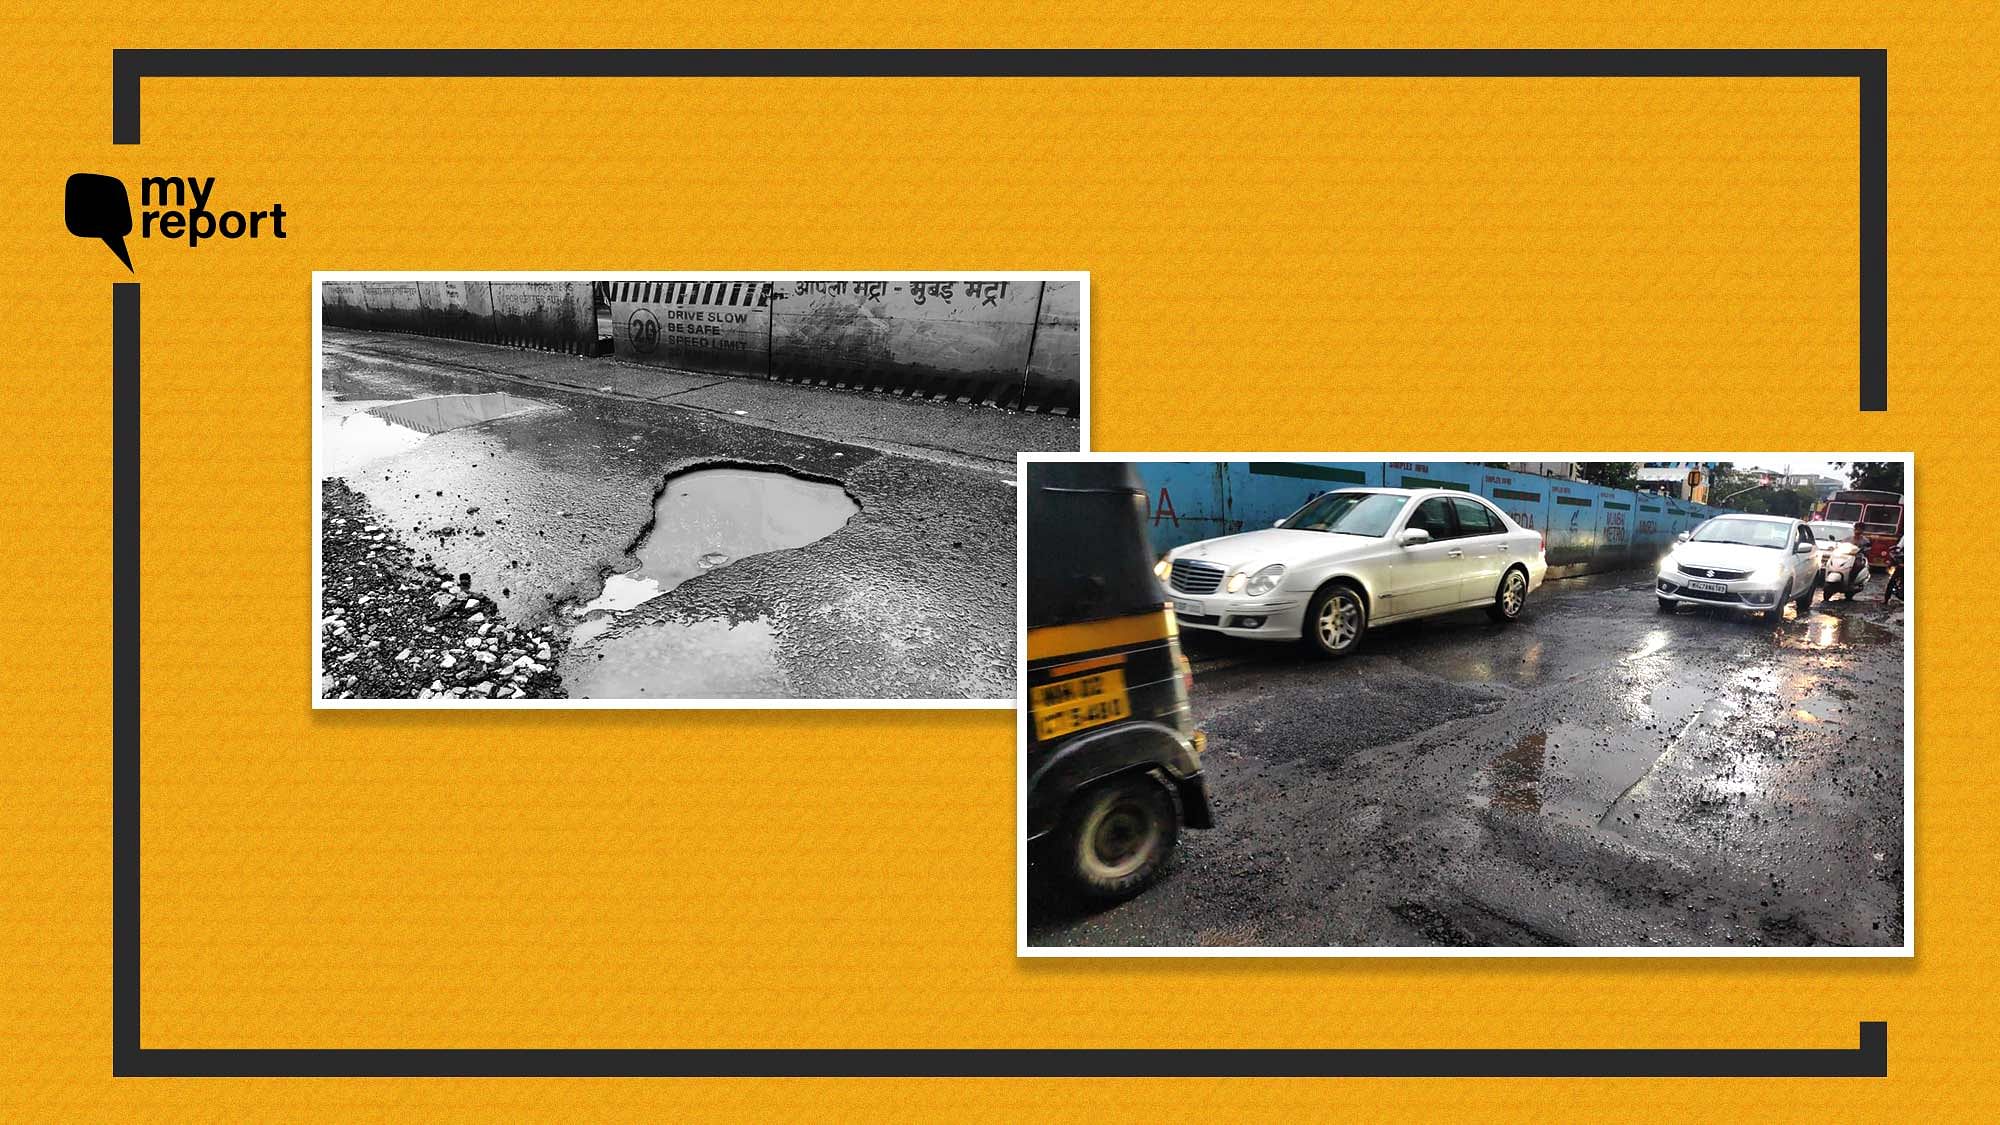 After the report on The Quint, BMC acted quickly and fixed potholes in Mumbai’s Santacruz.